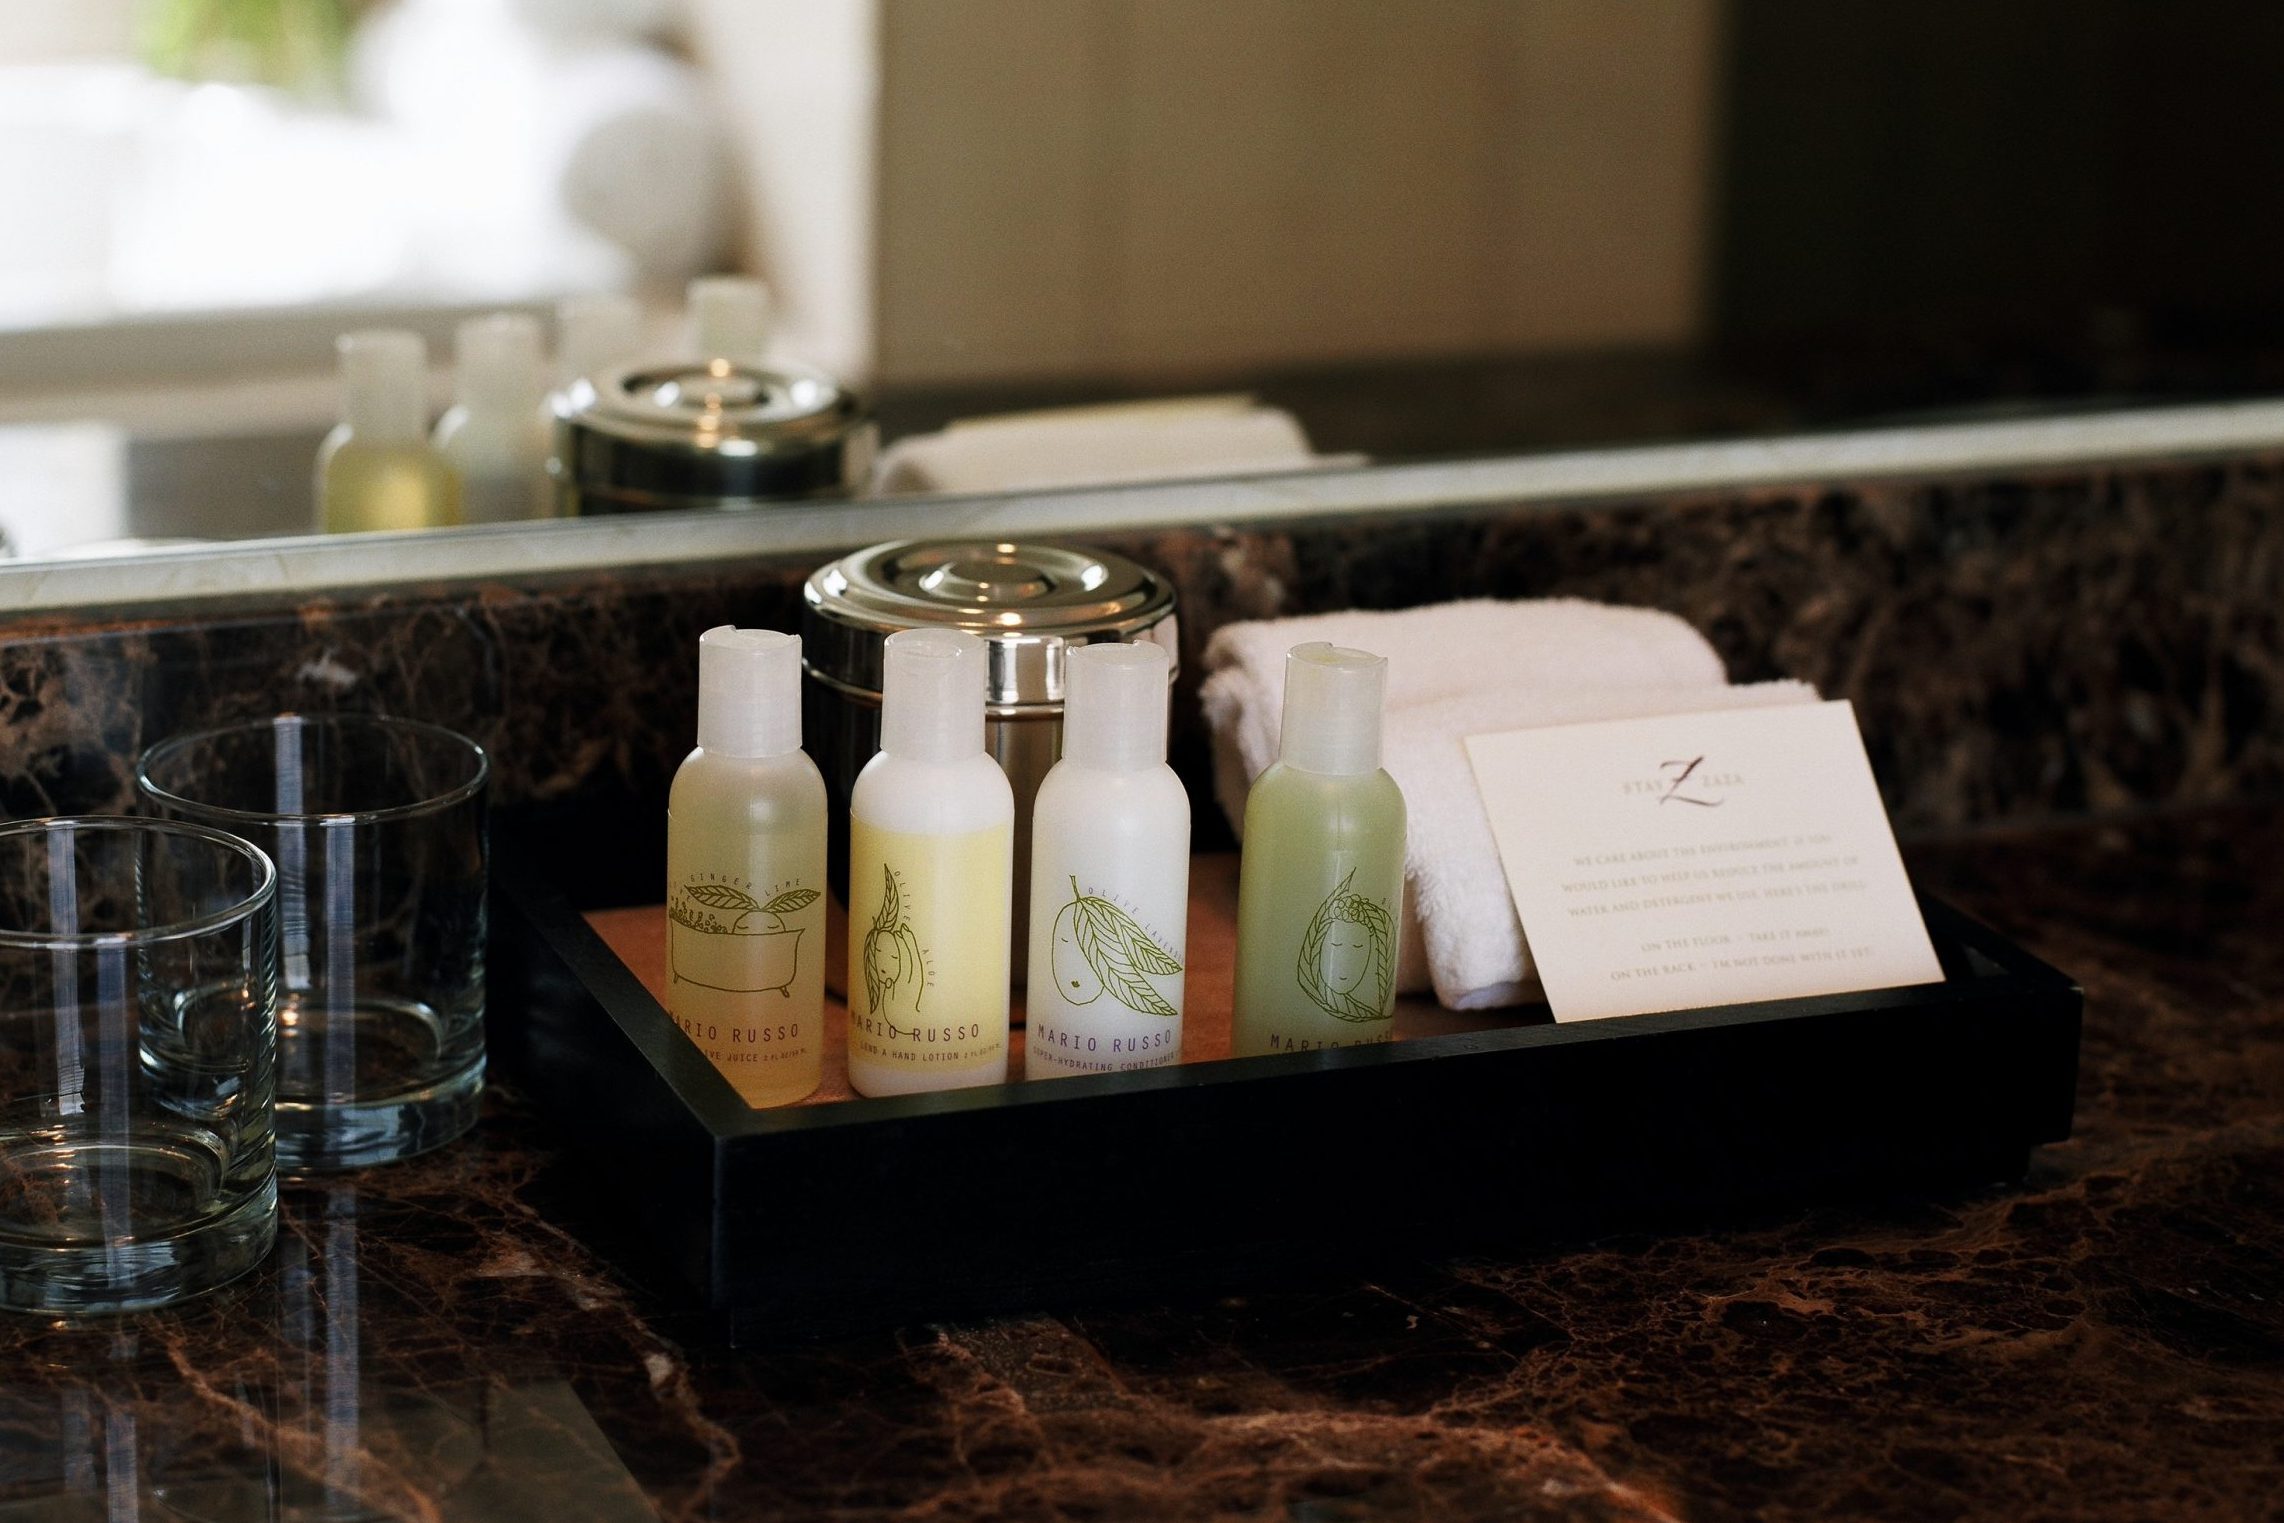 <p>Much like the mini soaps stocked in the bathroom, the travel-size shampoo and conditioner are also fine to take from your hotel room. Hotels sometimes brand these items too, Conteh says. So taking their shampoos and sporting the hotel brand name can help spread the word about a hotel. This goes for <a href="https://www.rd.com/article/motel-vs-hotel/">motels</a> too.</p>